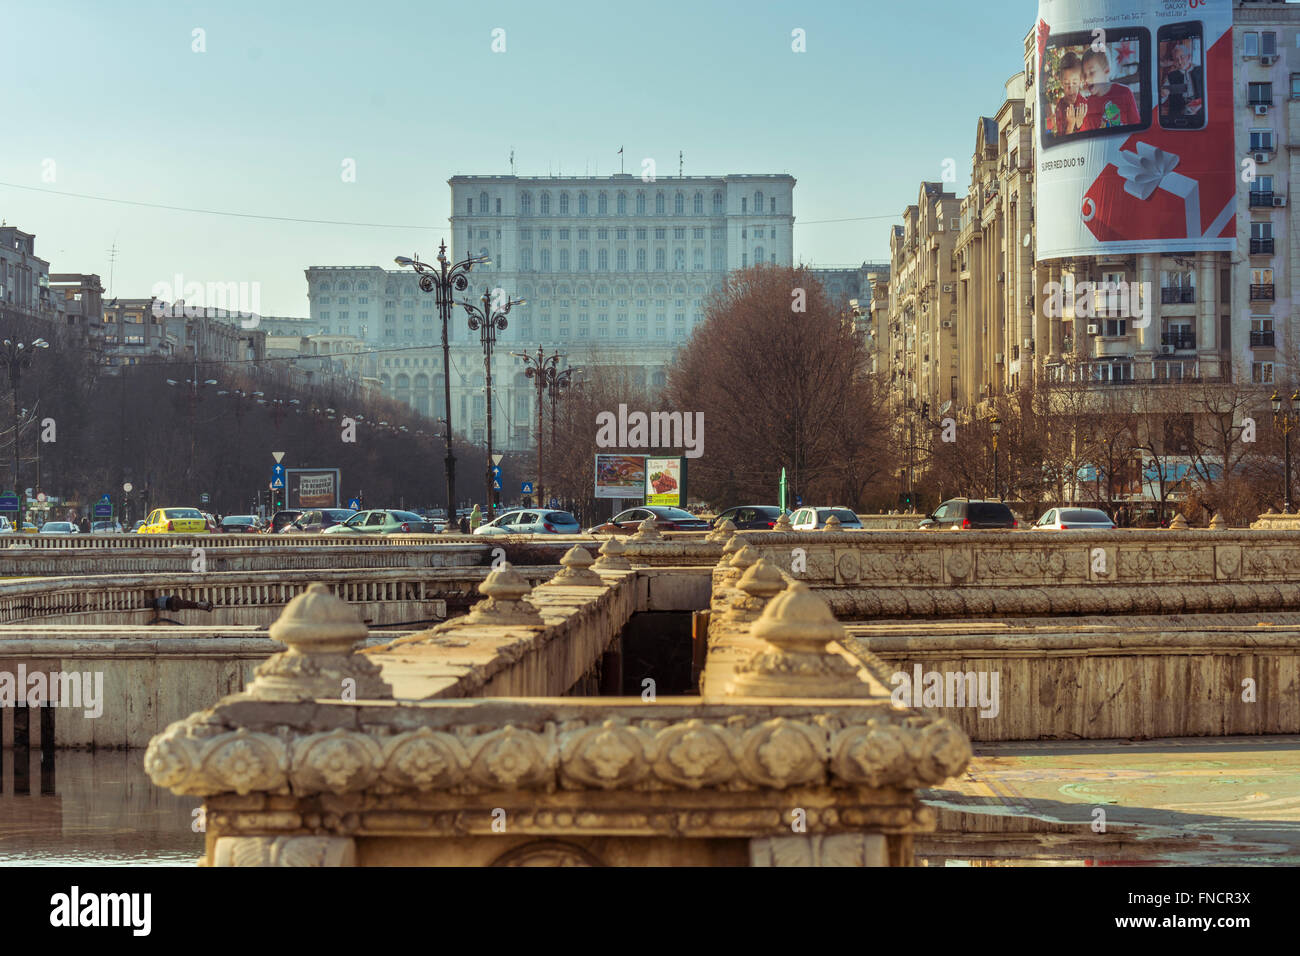 BUCHAREST, ROMANIA - FEBRUARY 06, 2016: Downtown Bucharest Unirii Square with Palace of the Parliament in background. Palace of  Stock Photo